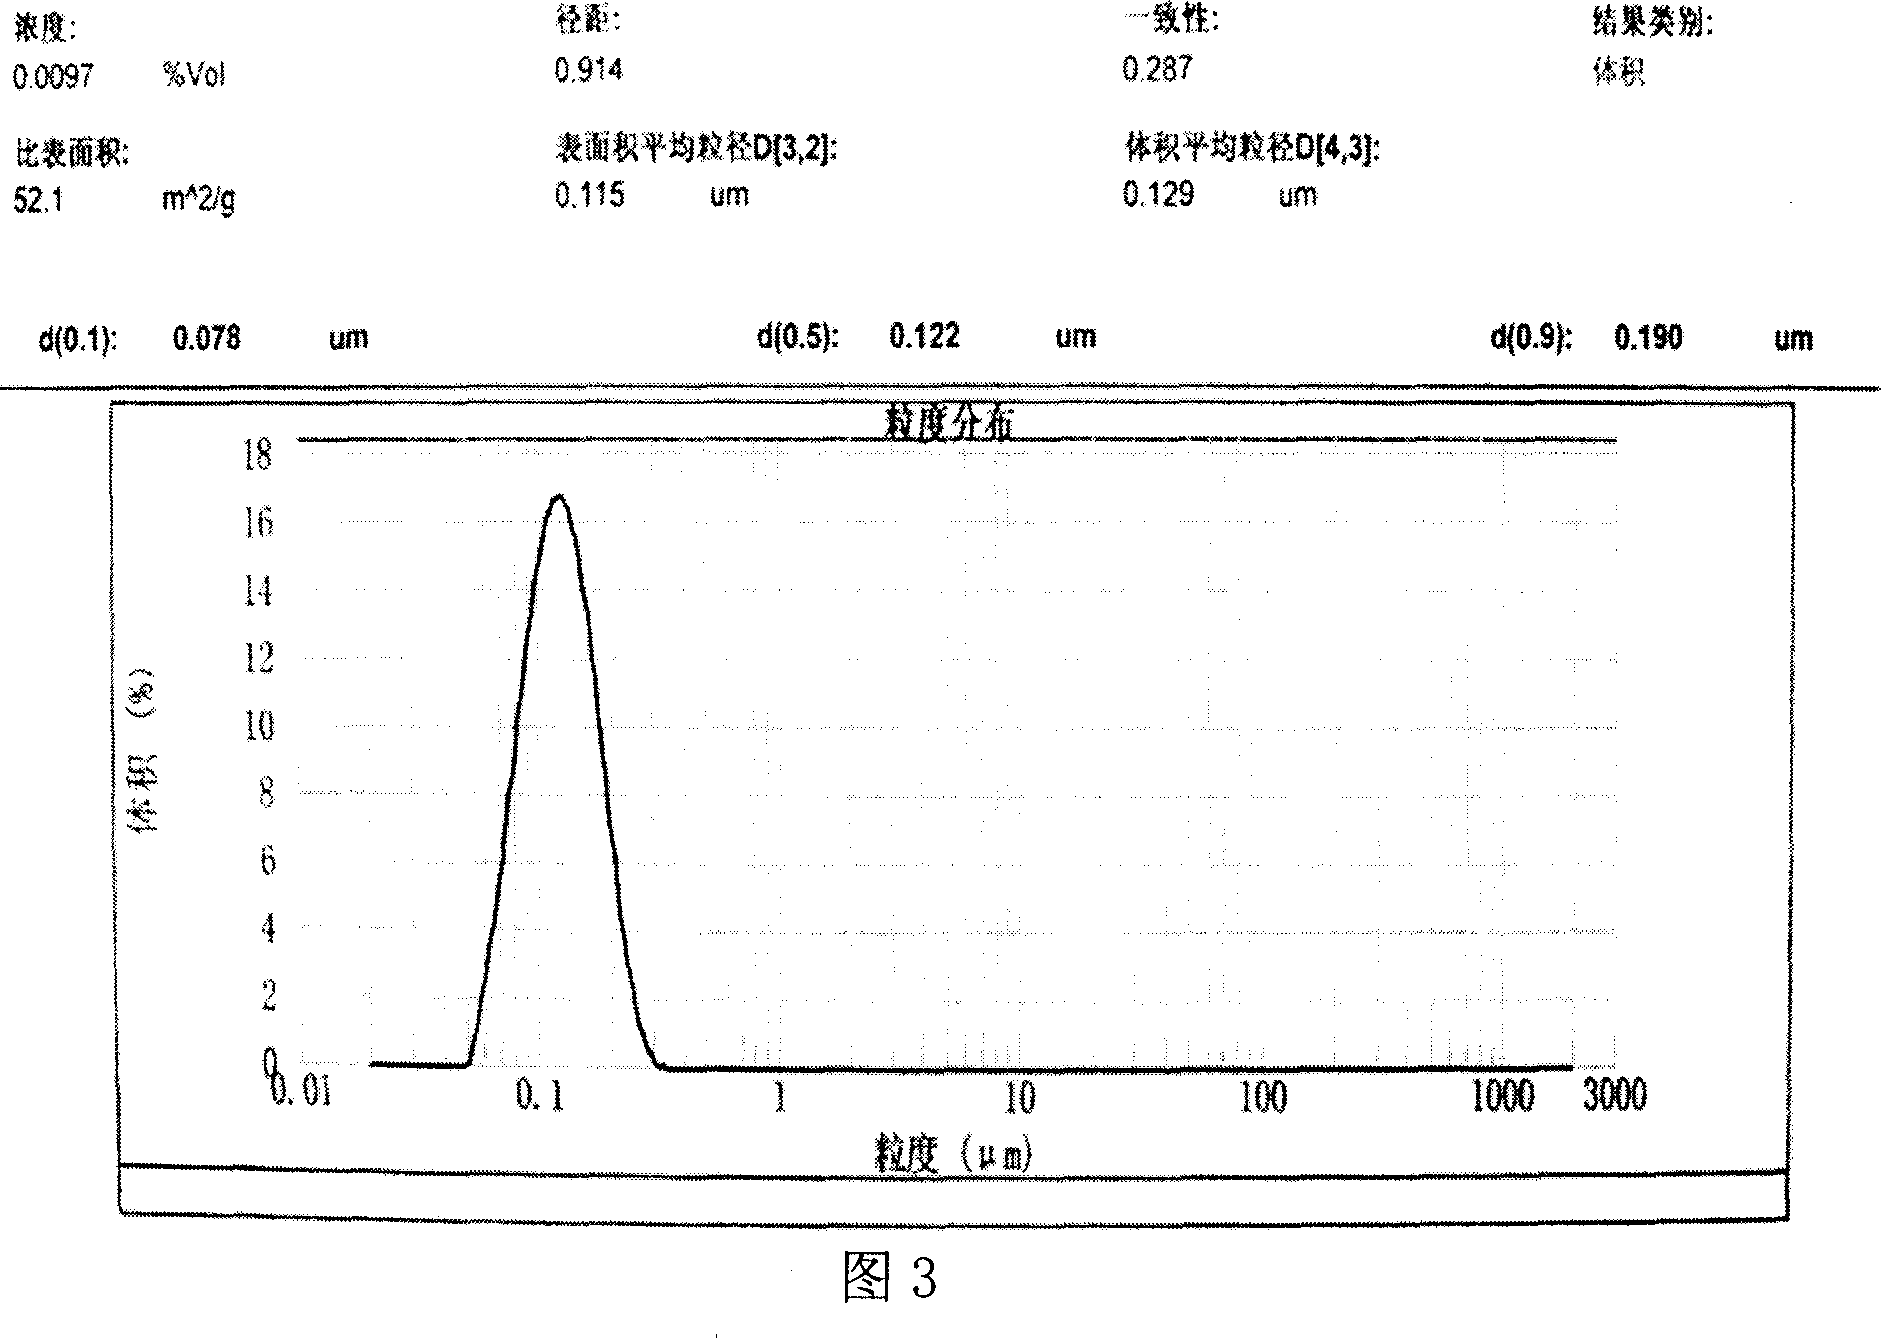 Asarone submicron emulsion and its preparation method